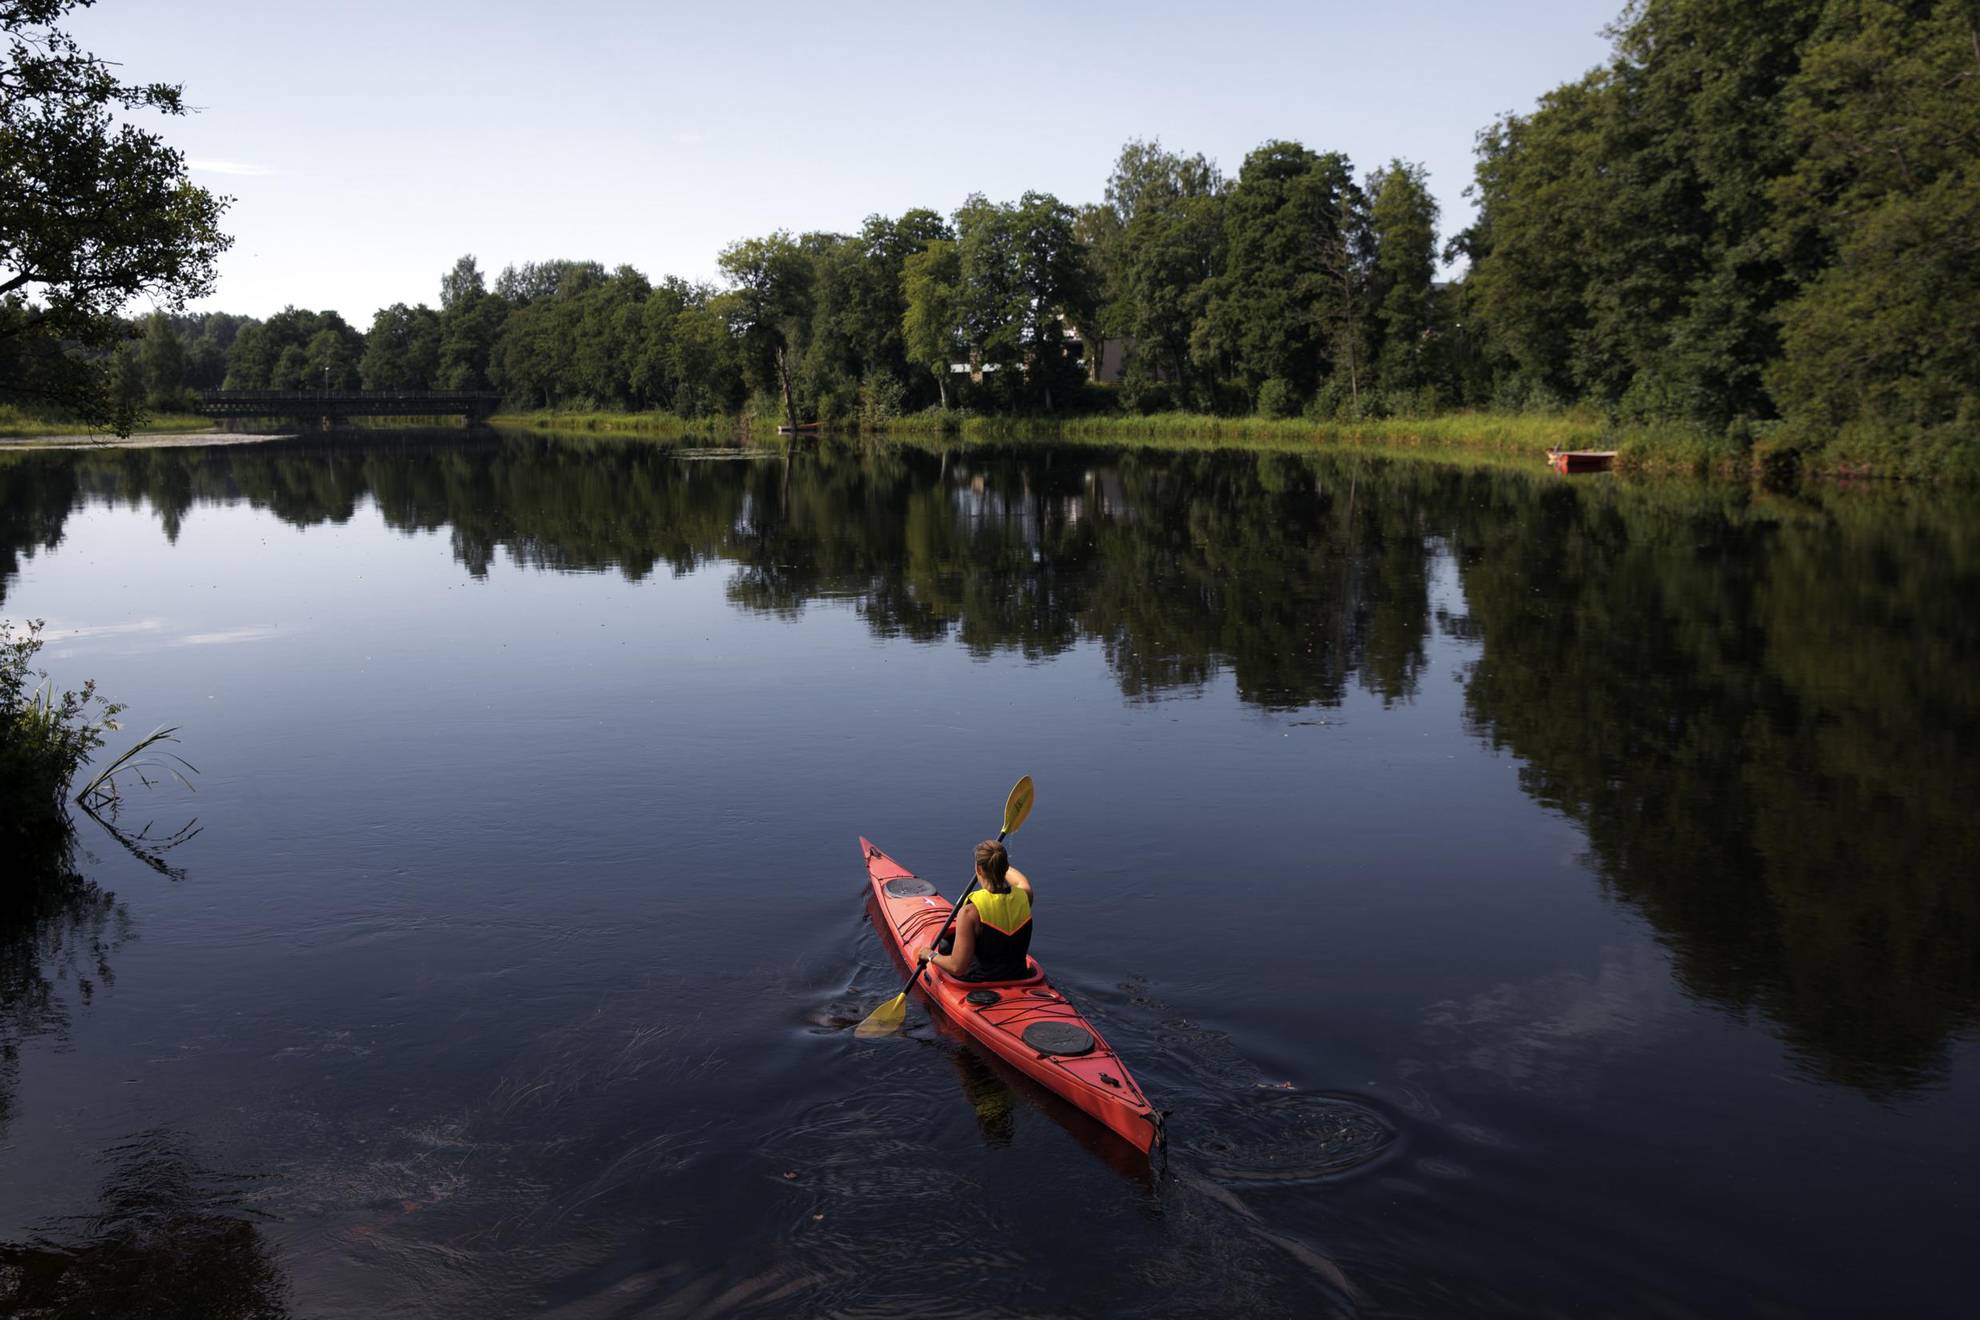 A person is kayaking on a calm lake during the summer.